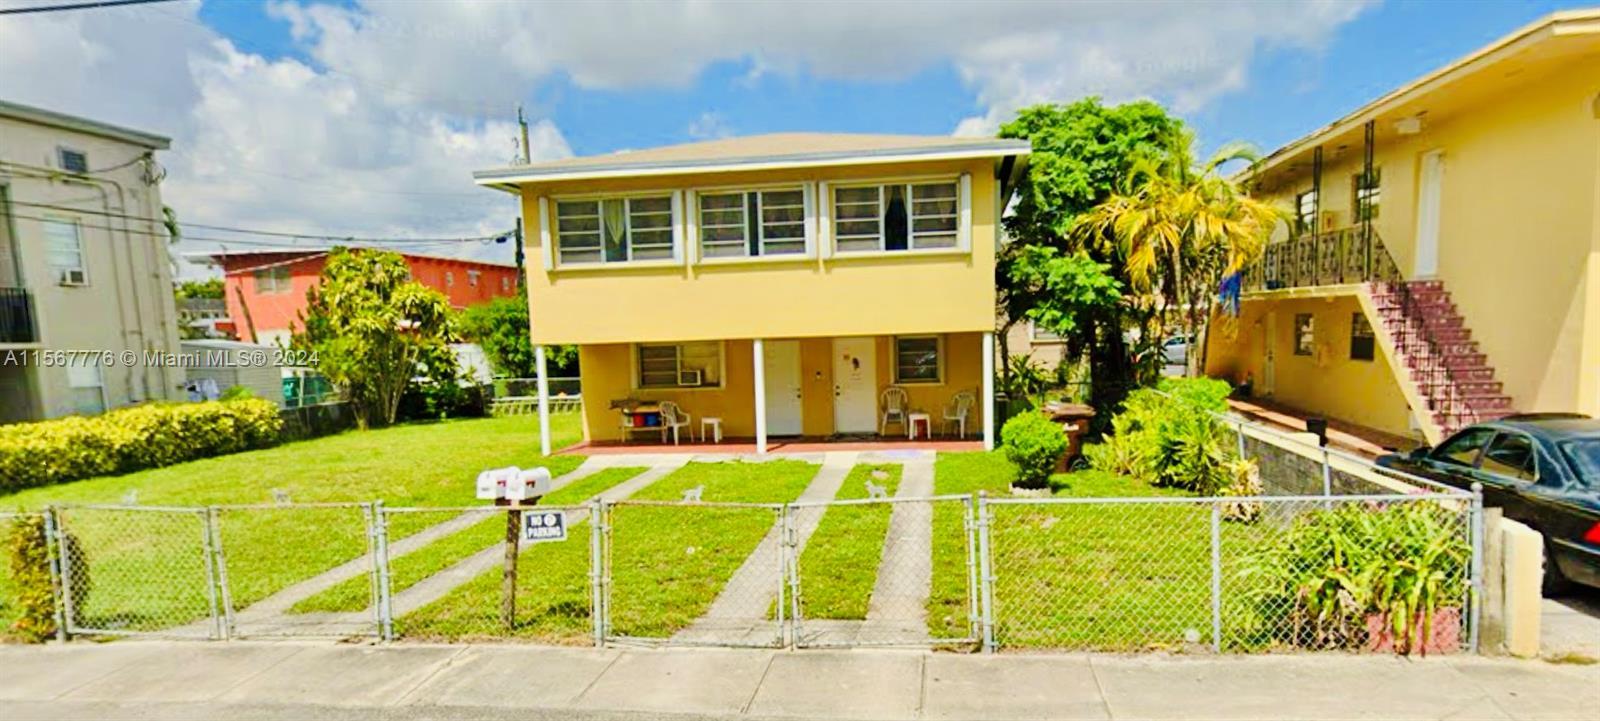 Investor's Dream! This spacious duplex in East Hialeah offers limitless potential. With its prime lo